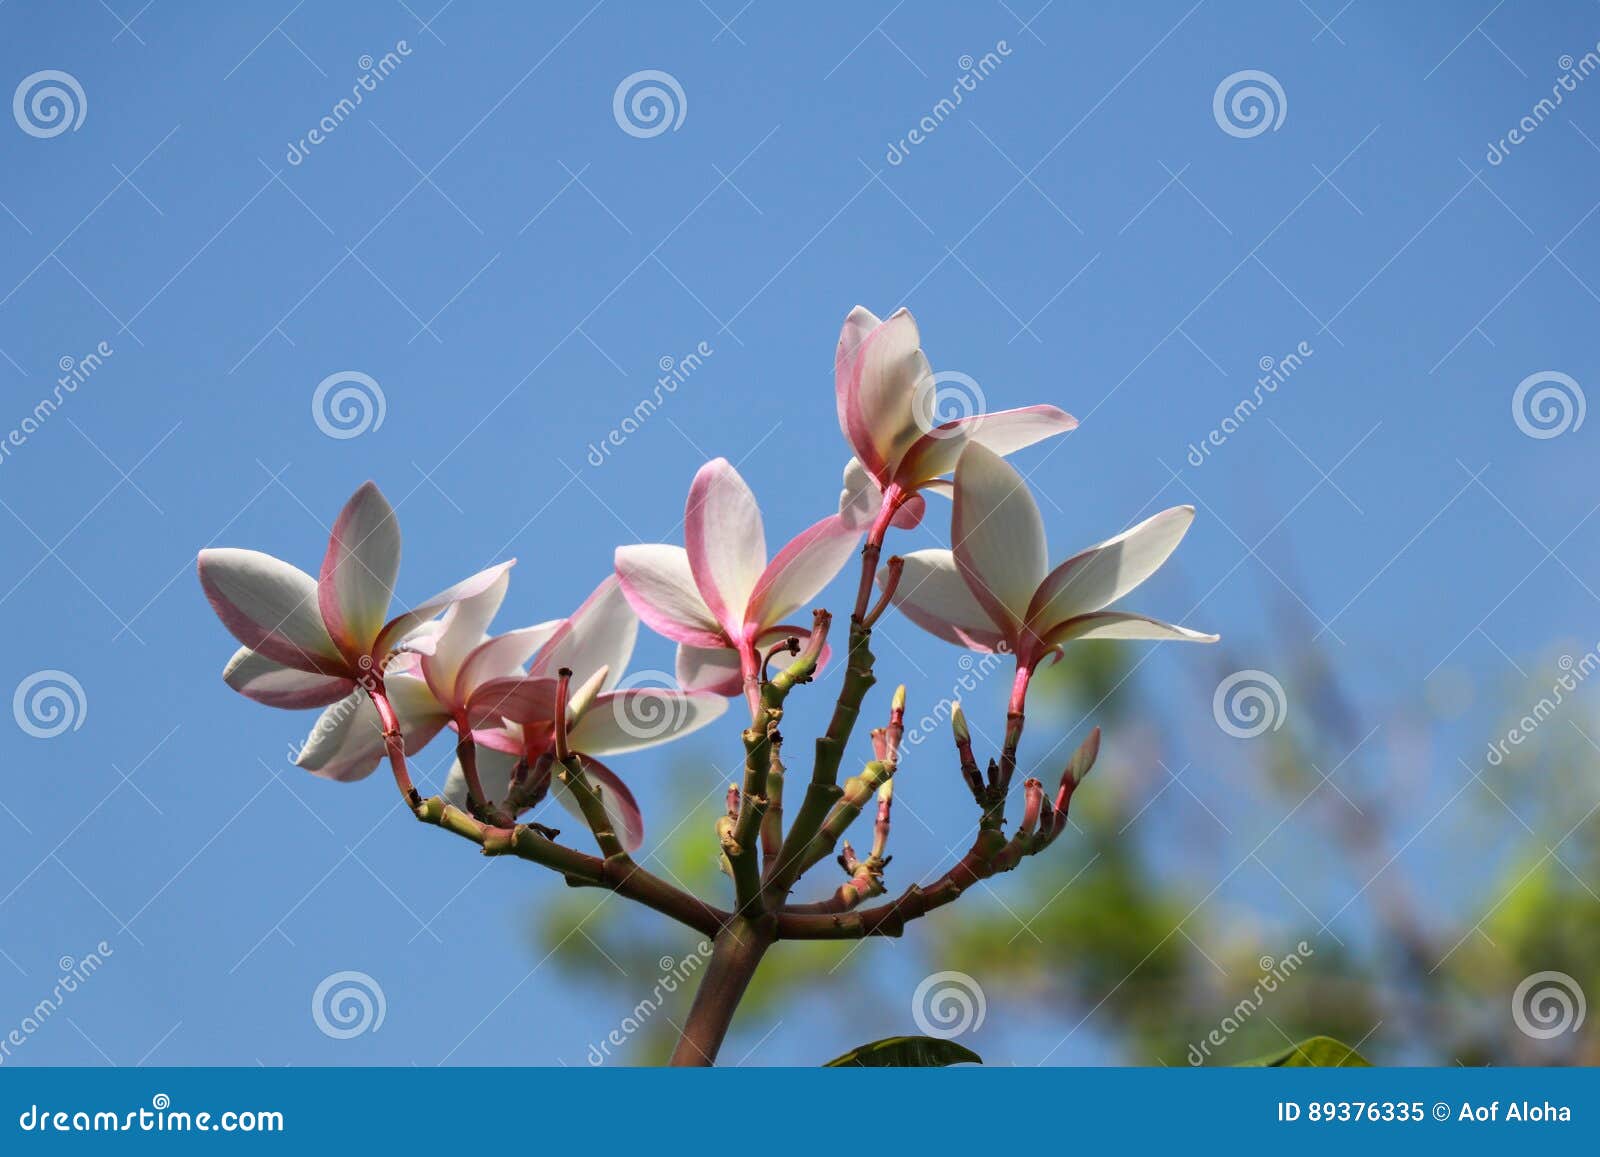 A Photo of Beautiful Plumeria Flowers on a Holiday Stock Image - Image ...